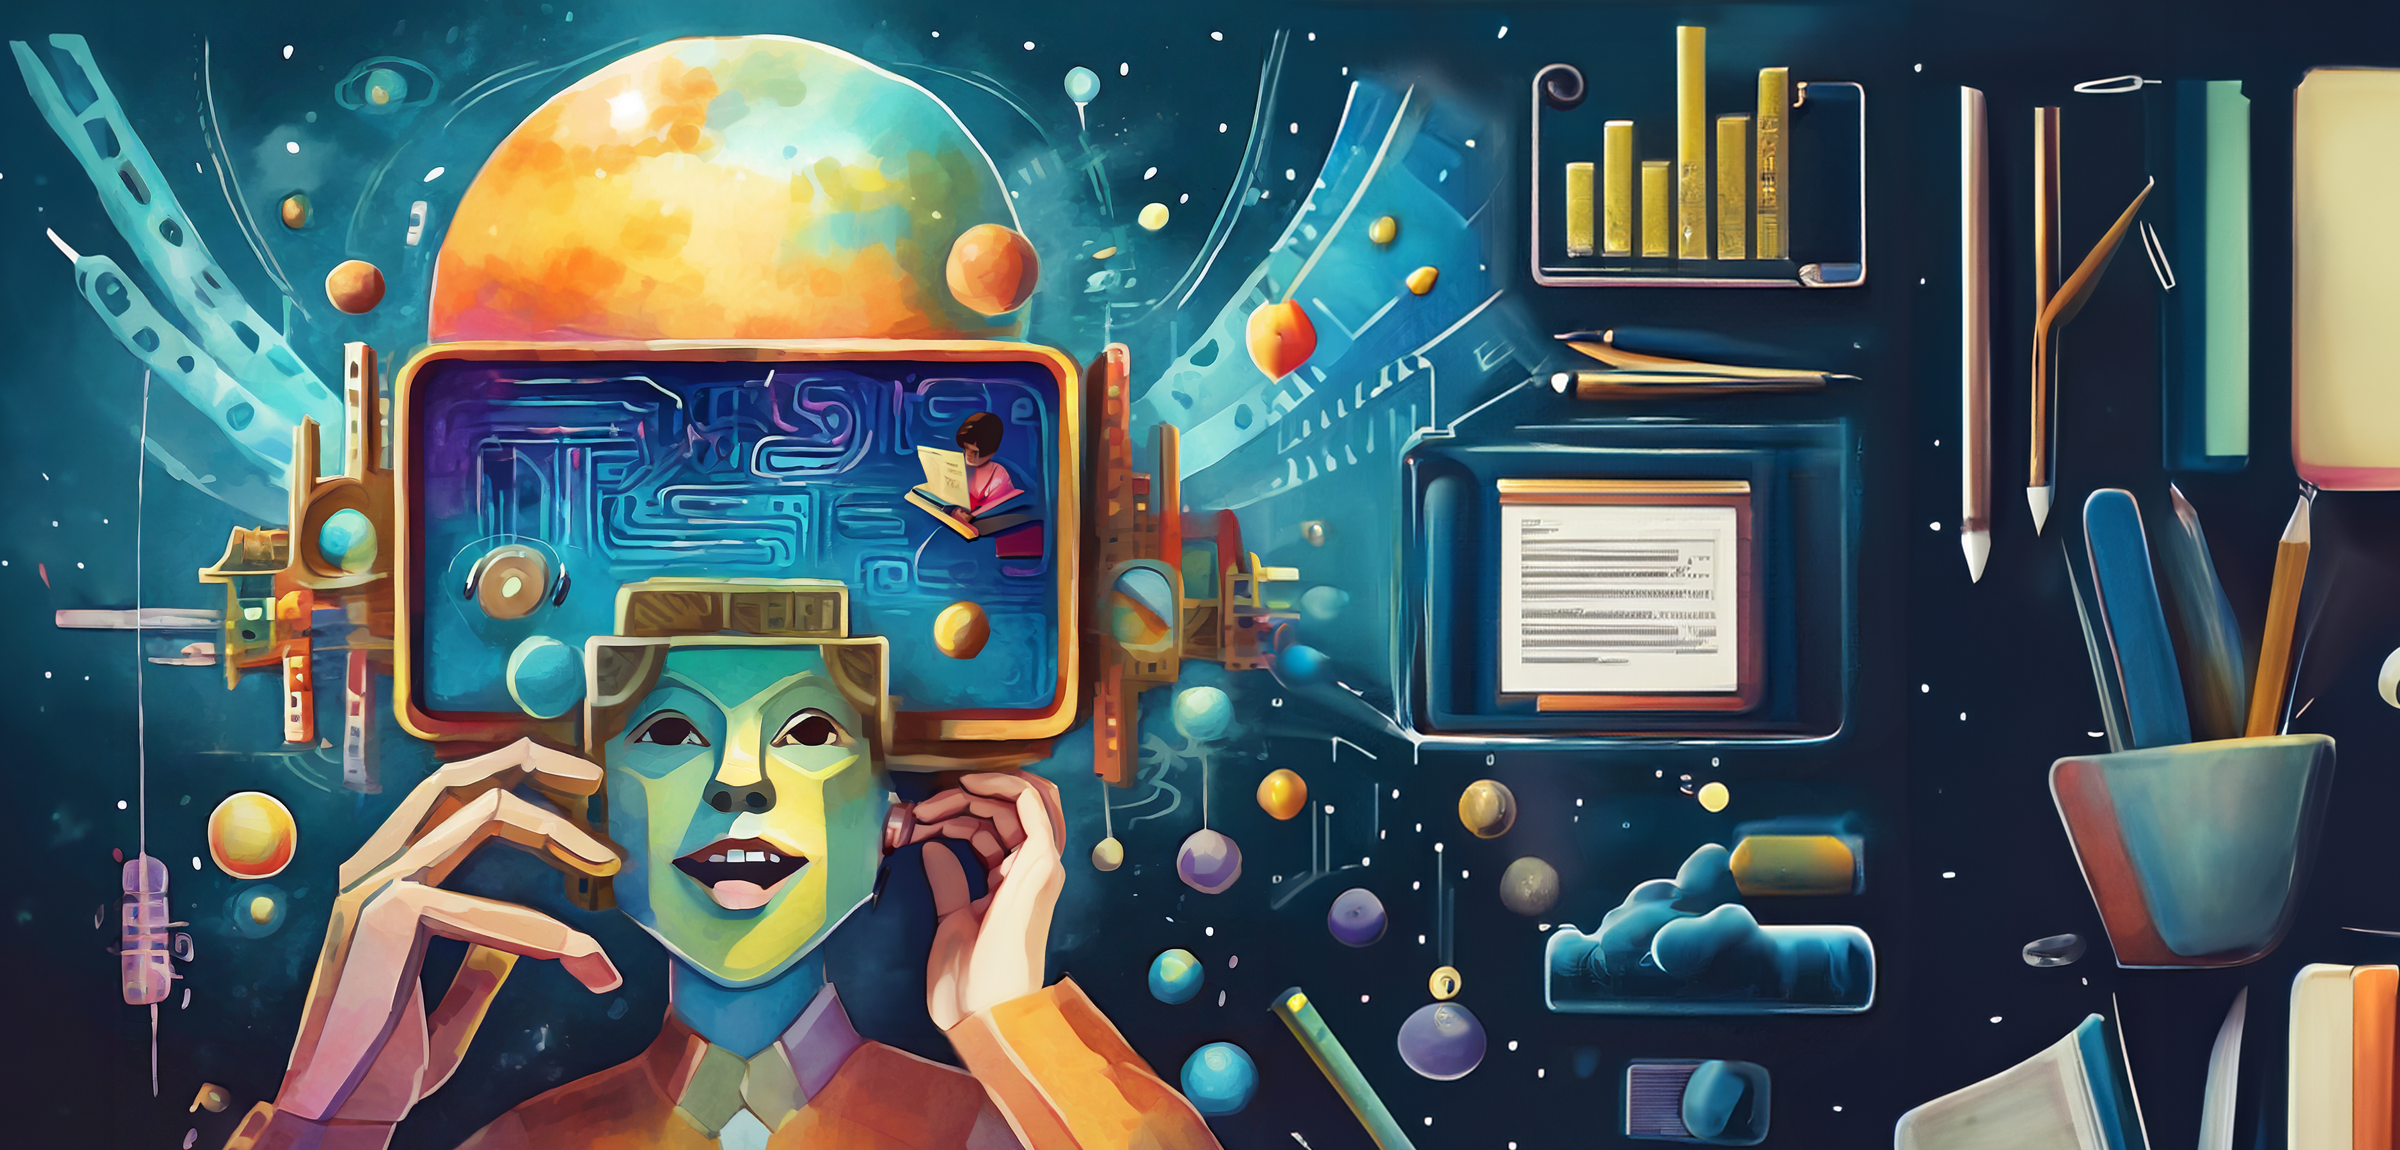 An illustration of a human-like being with a screen on their head. There are planets, pencils and graphs in the background.